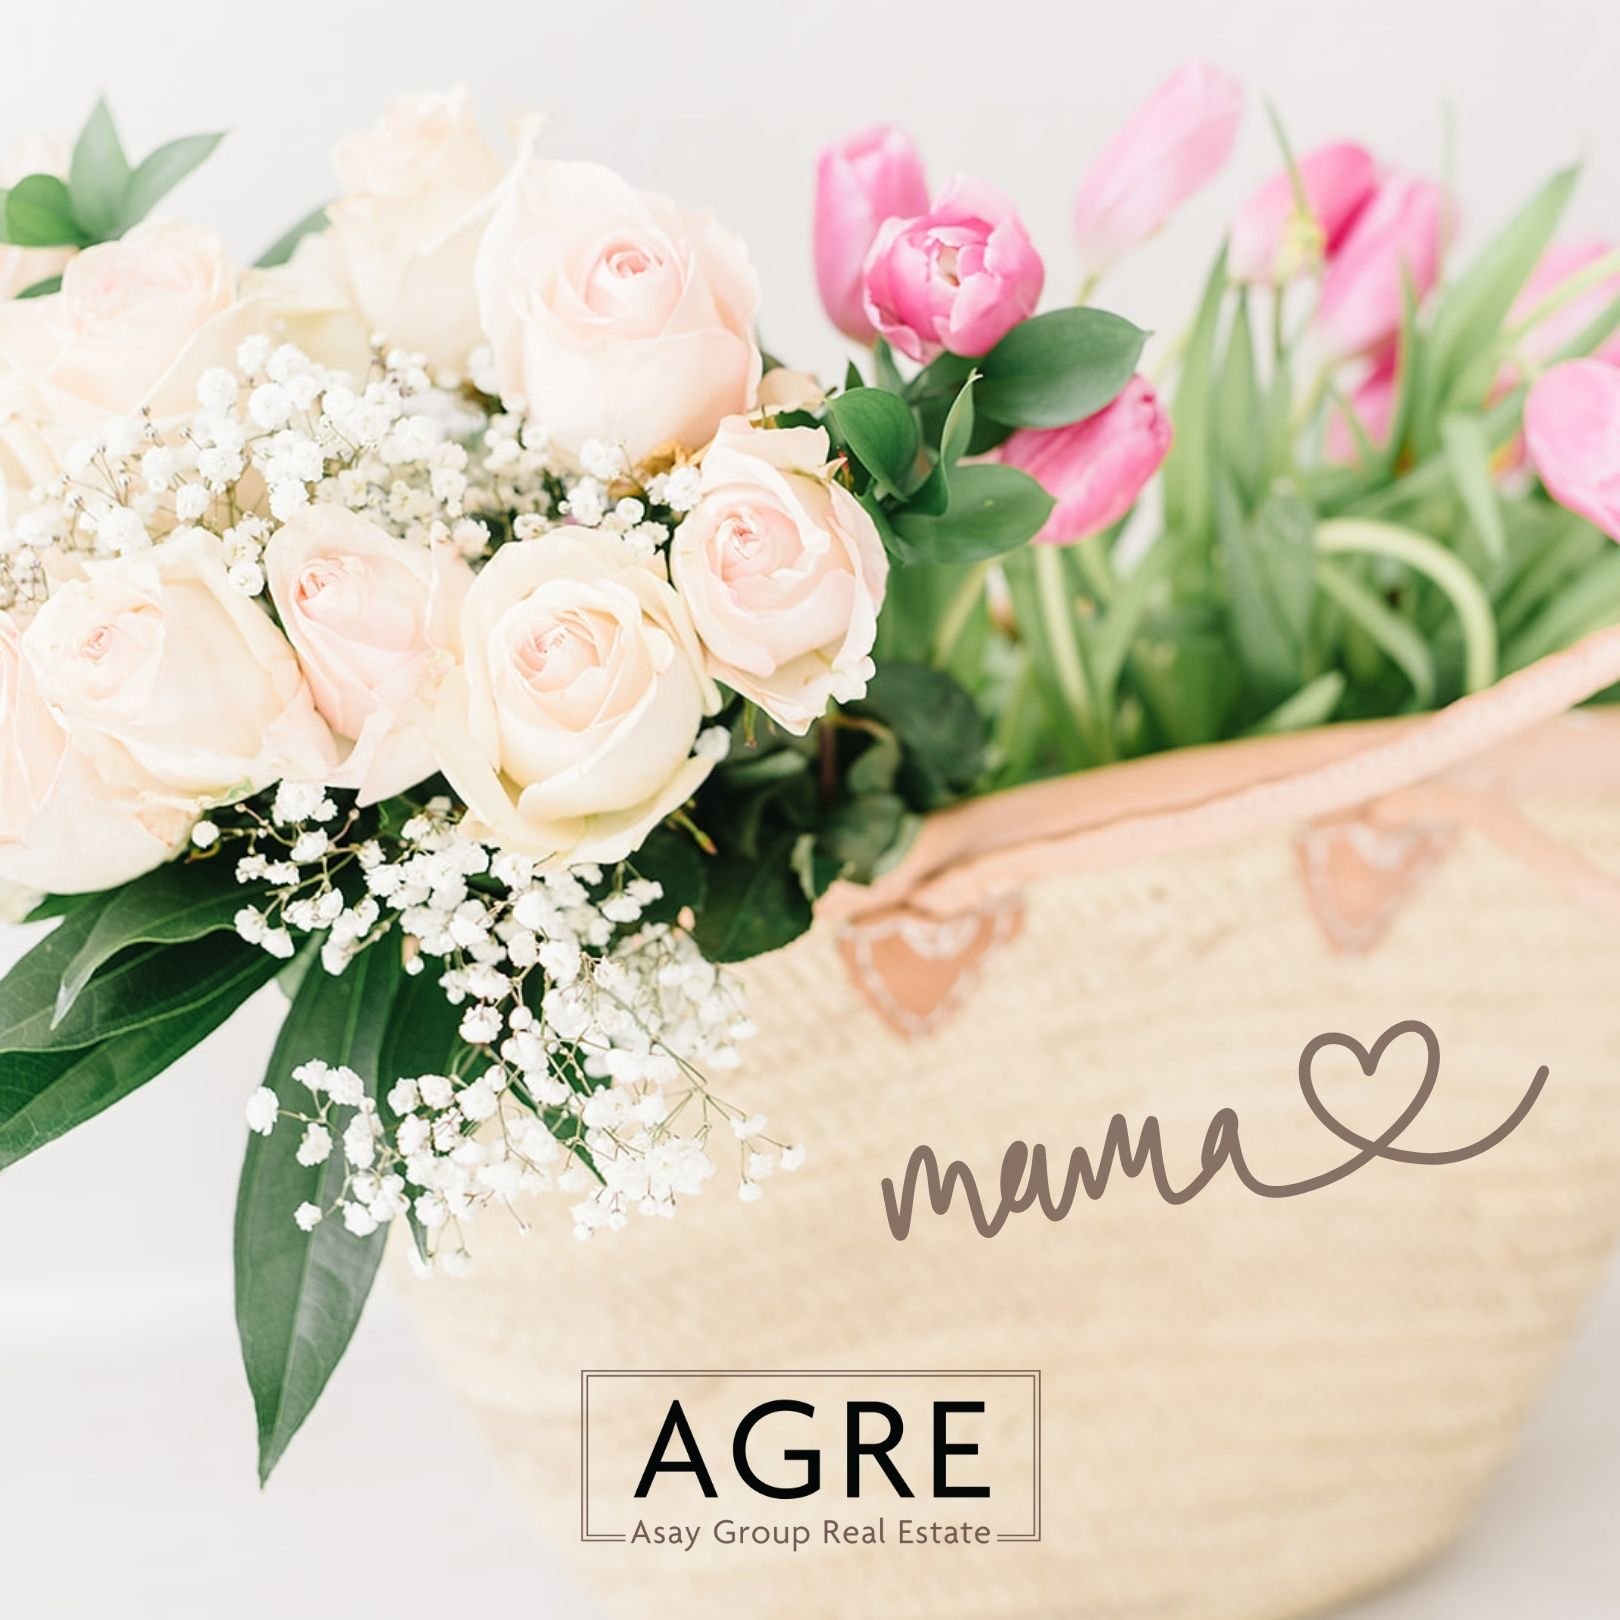 Just because your mom *can* buy herself flowers, doesn't mean she should have to. Happy Day to all the moms, grandmoms, aunts, and bonus moms. Hope you get spoiled in the manner of which you deserve💐🍫💗

@amberticephoto #agre #asaygrouprealestate #